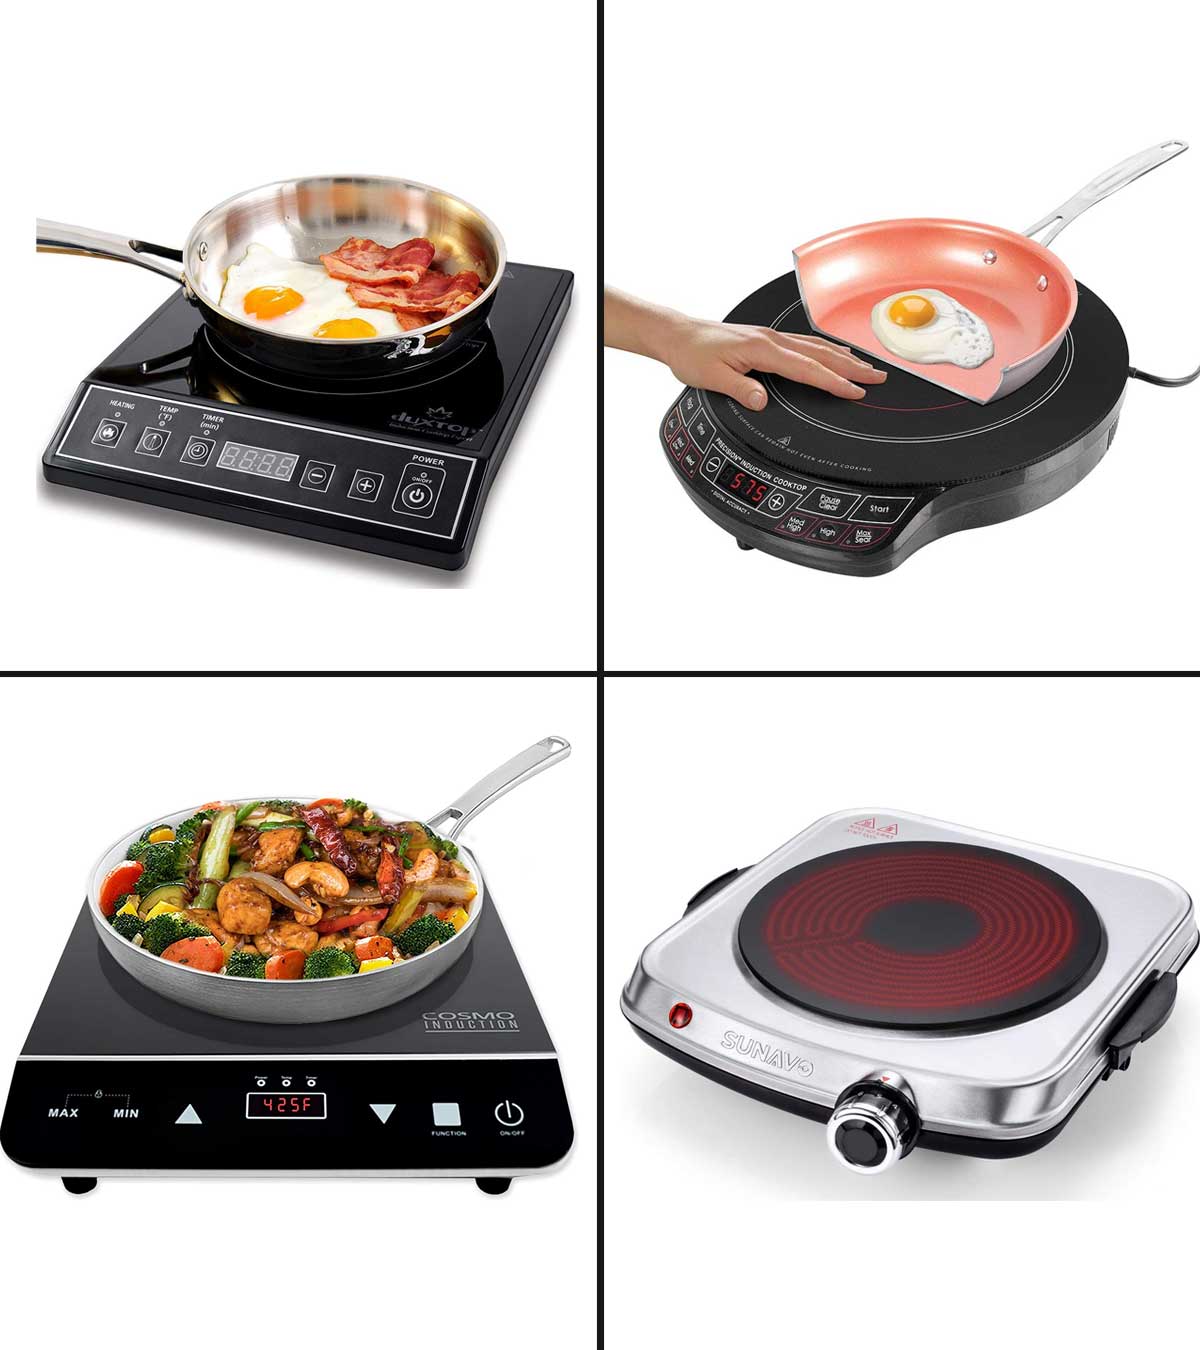 Why an Induction Range Should be on Your Kitchen Appliance Shortlist